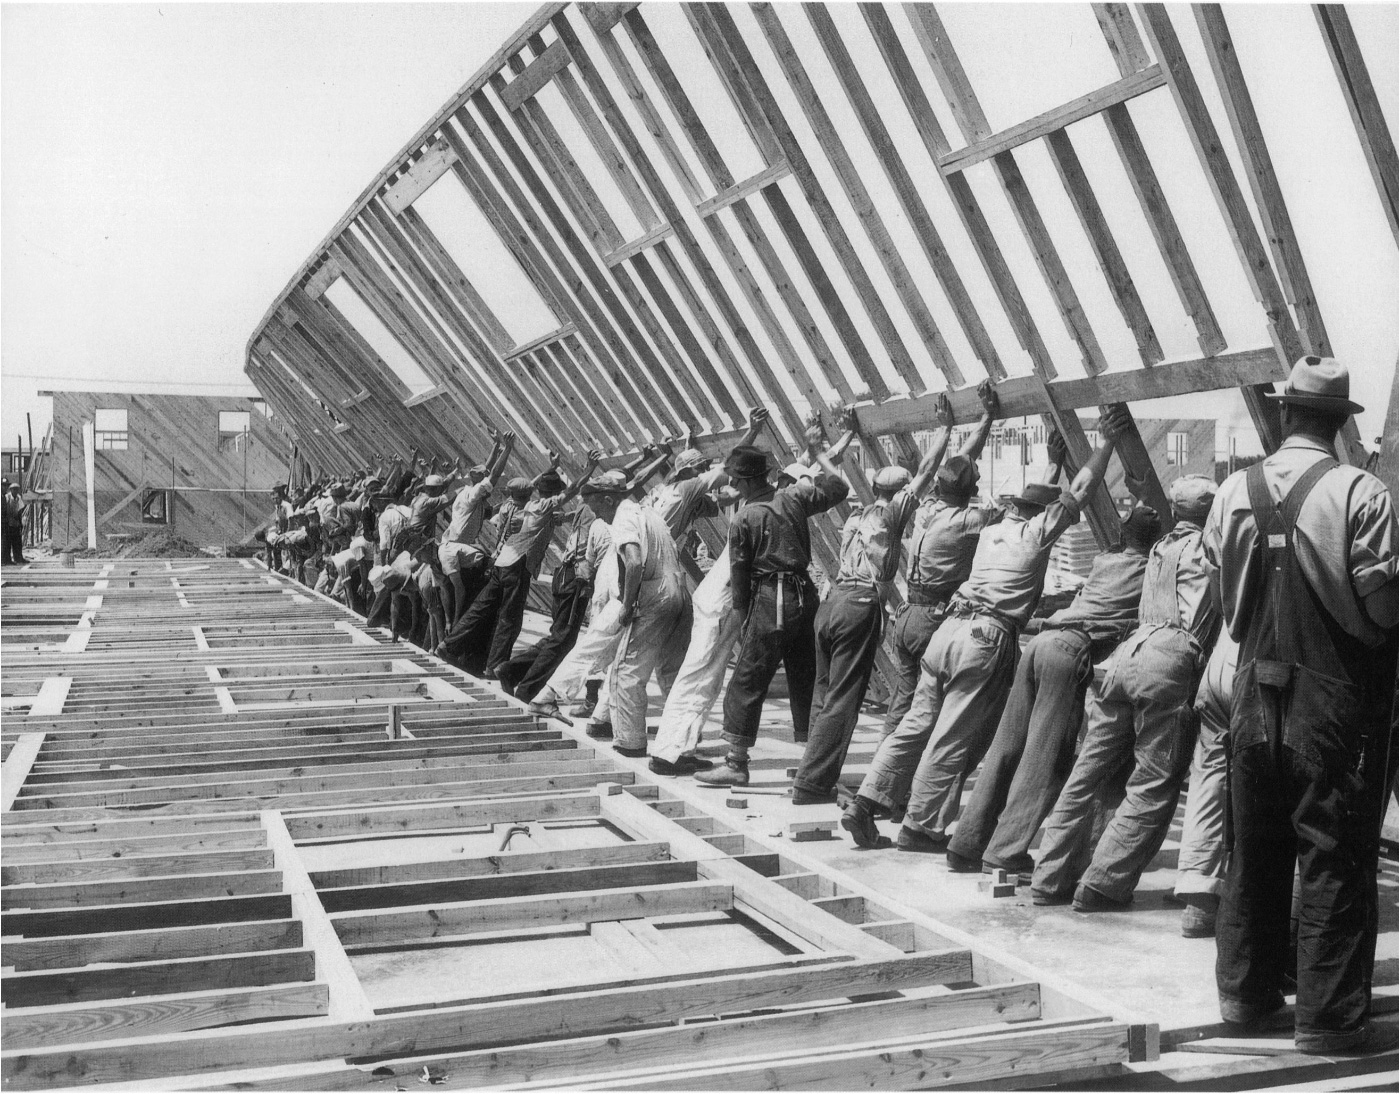 Black and white photo of men working together to raise a wood frame